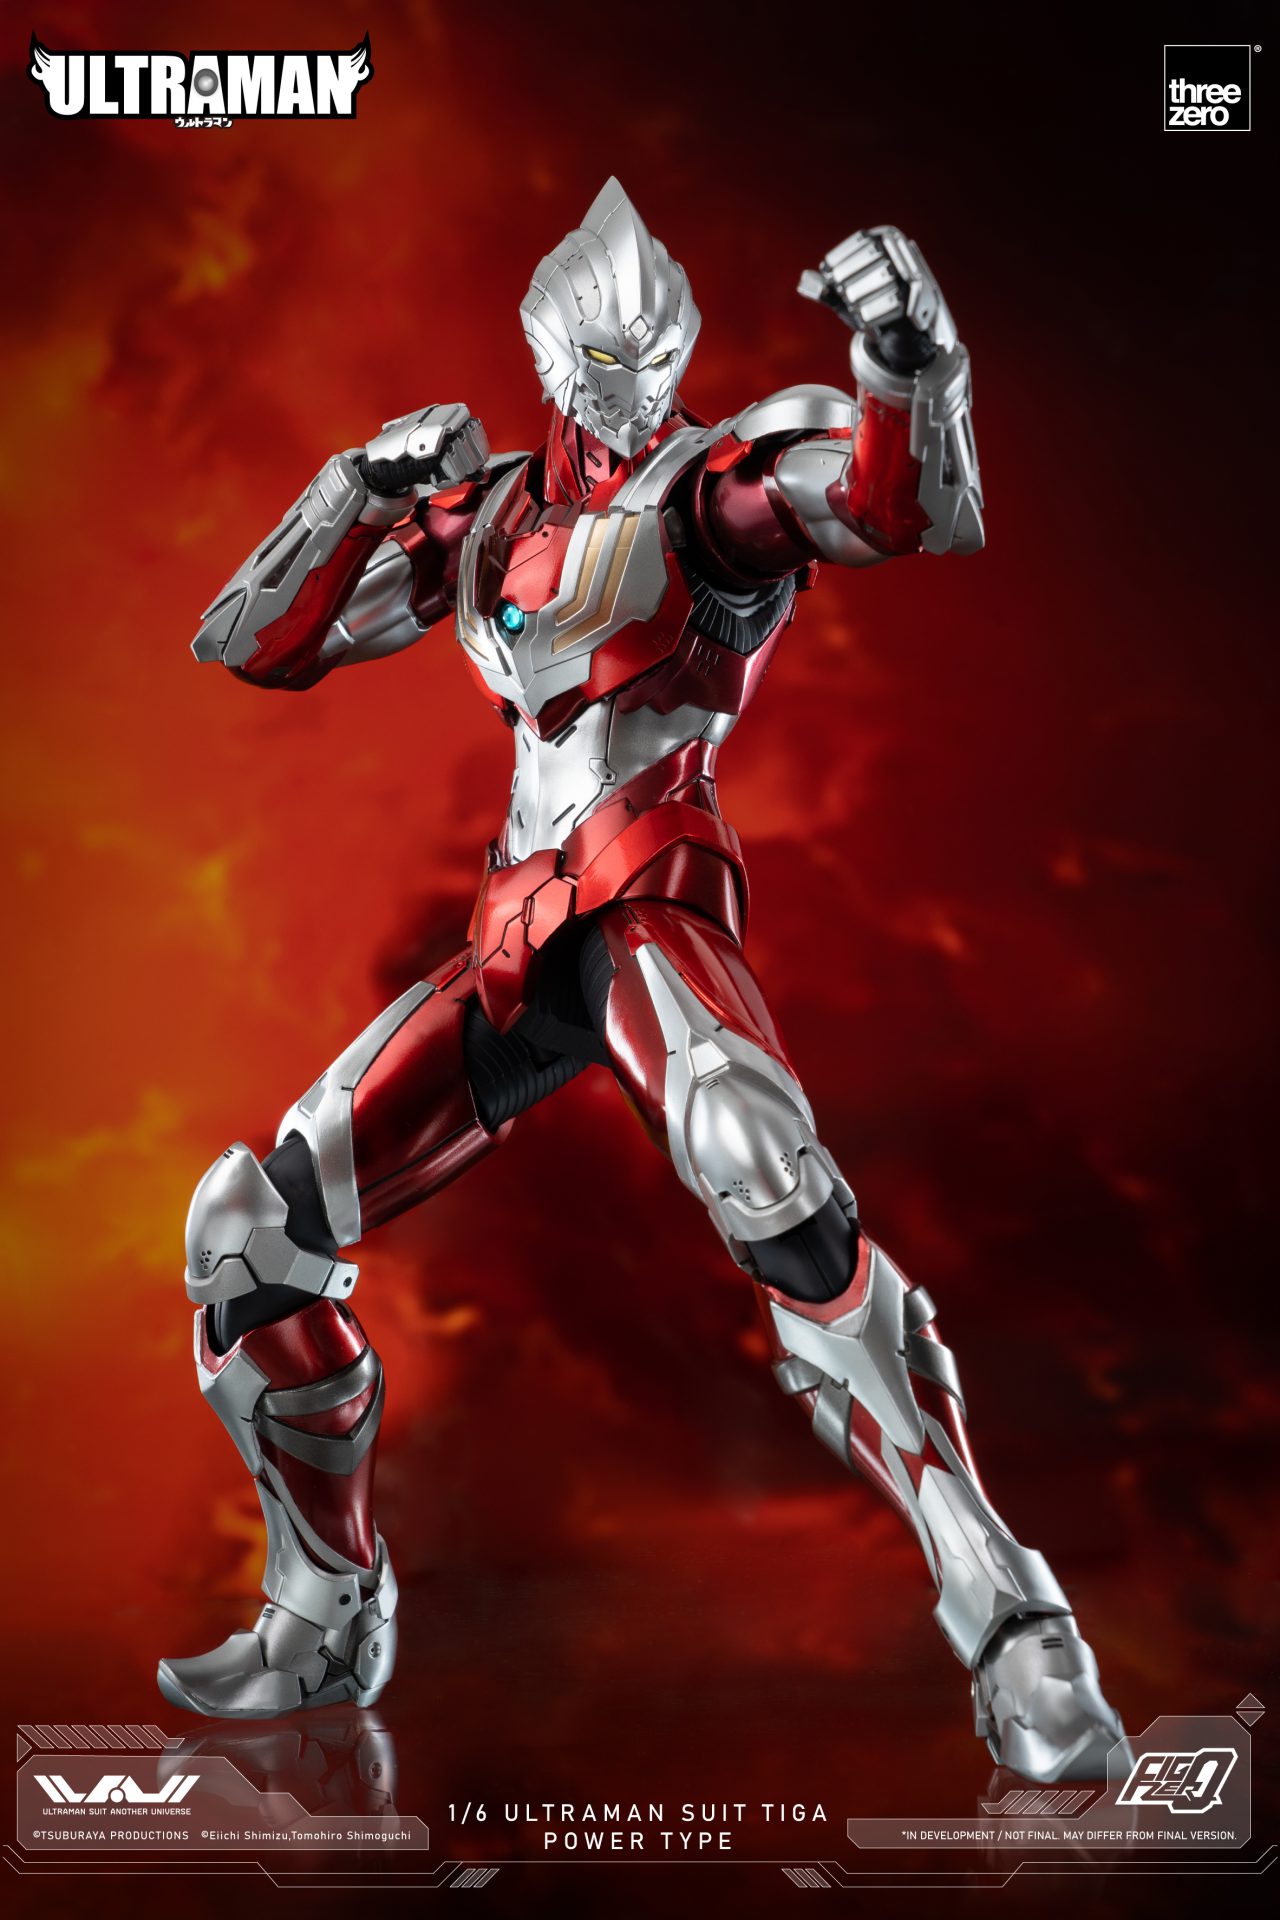 Preorders Starts for 1/6th Scale Articulated Figure of ULTRAMAN SUIT